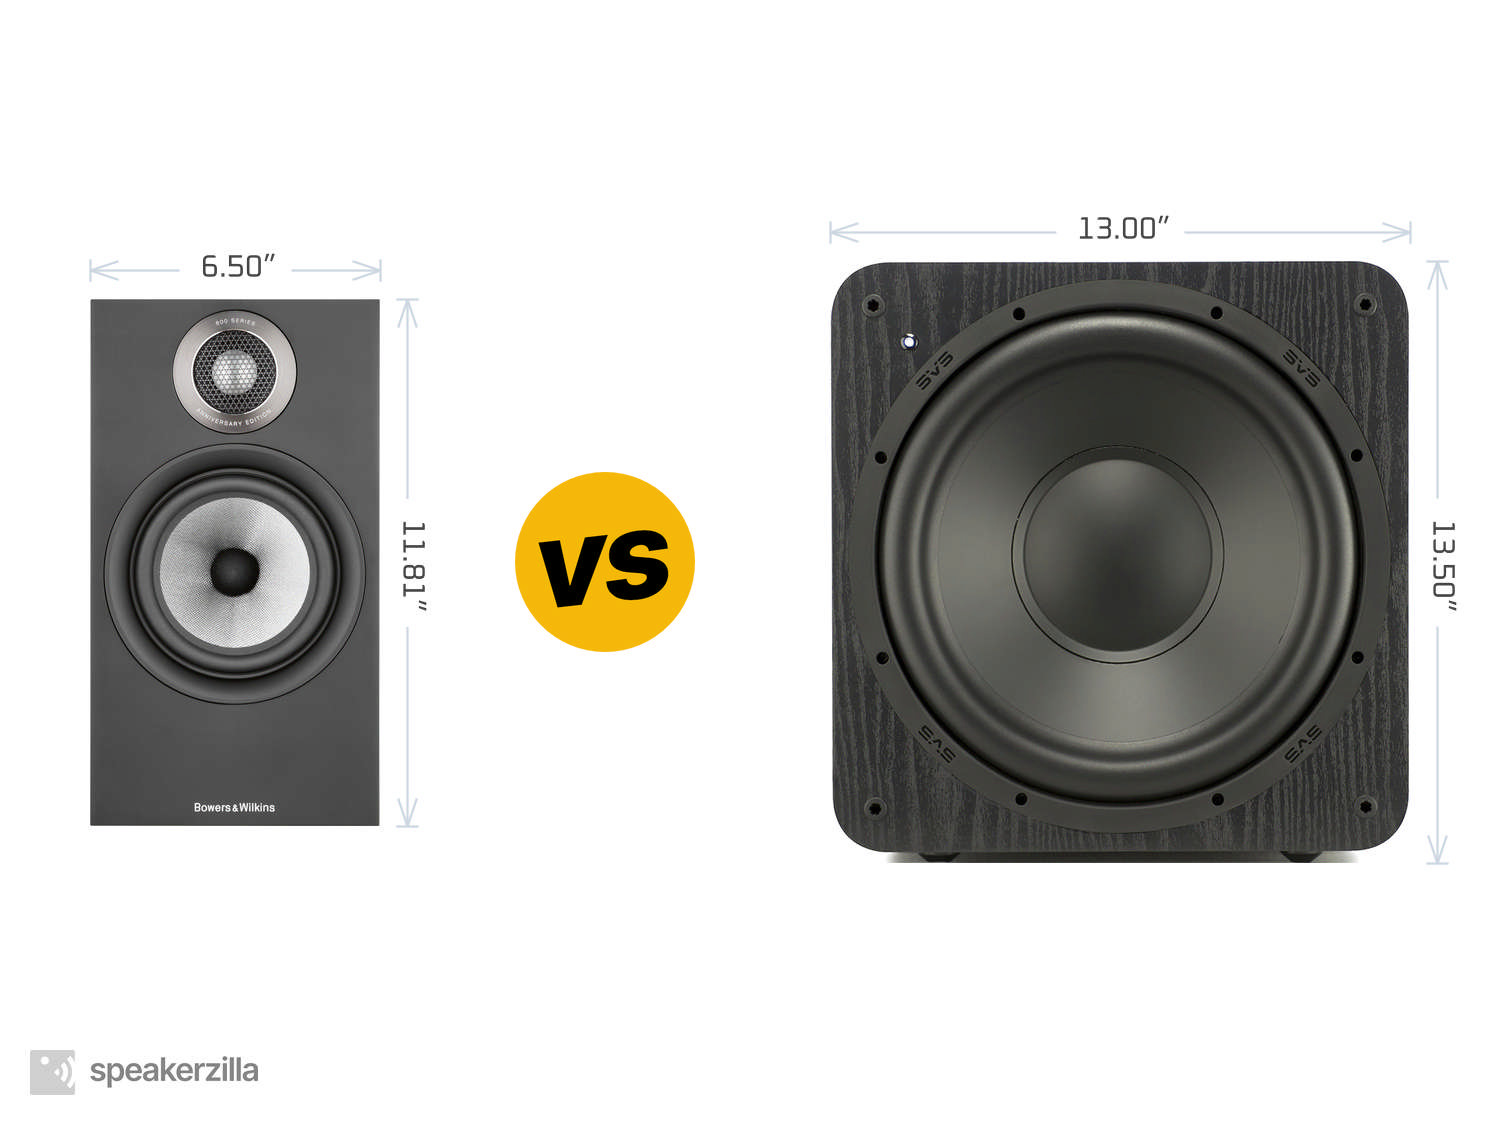 Bowers & Wilkins 607 S2 Anniversary Edition Speakers vs. SVS SB-1000 Subwoofer